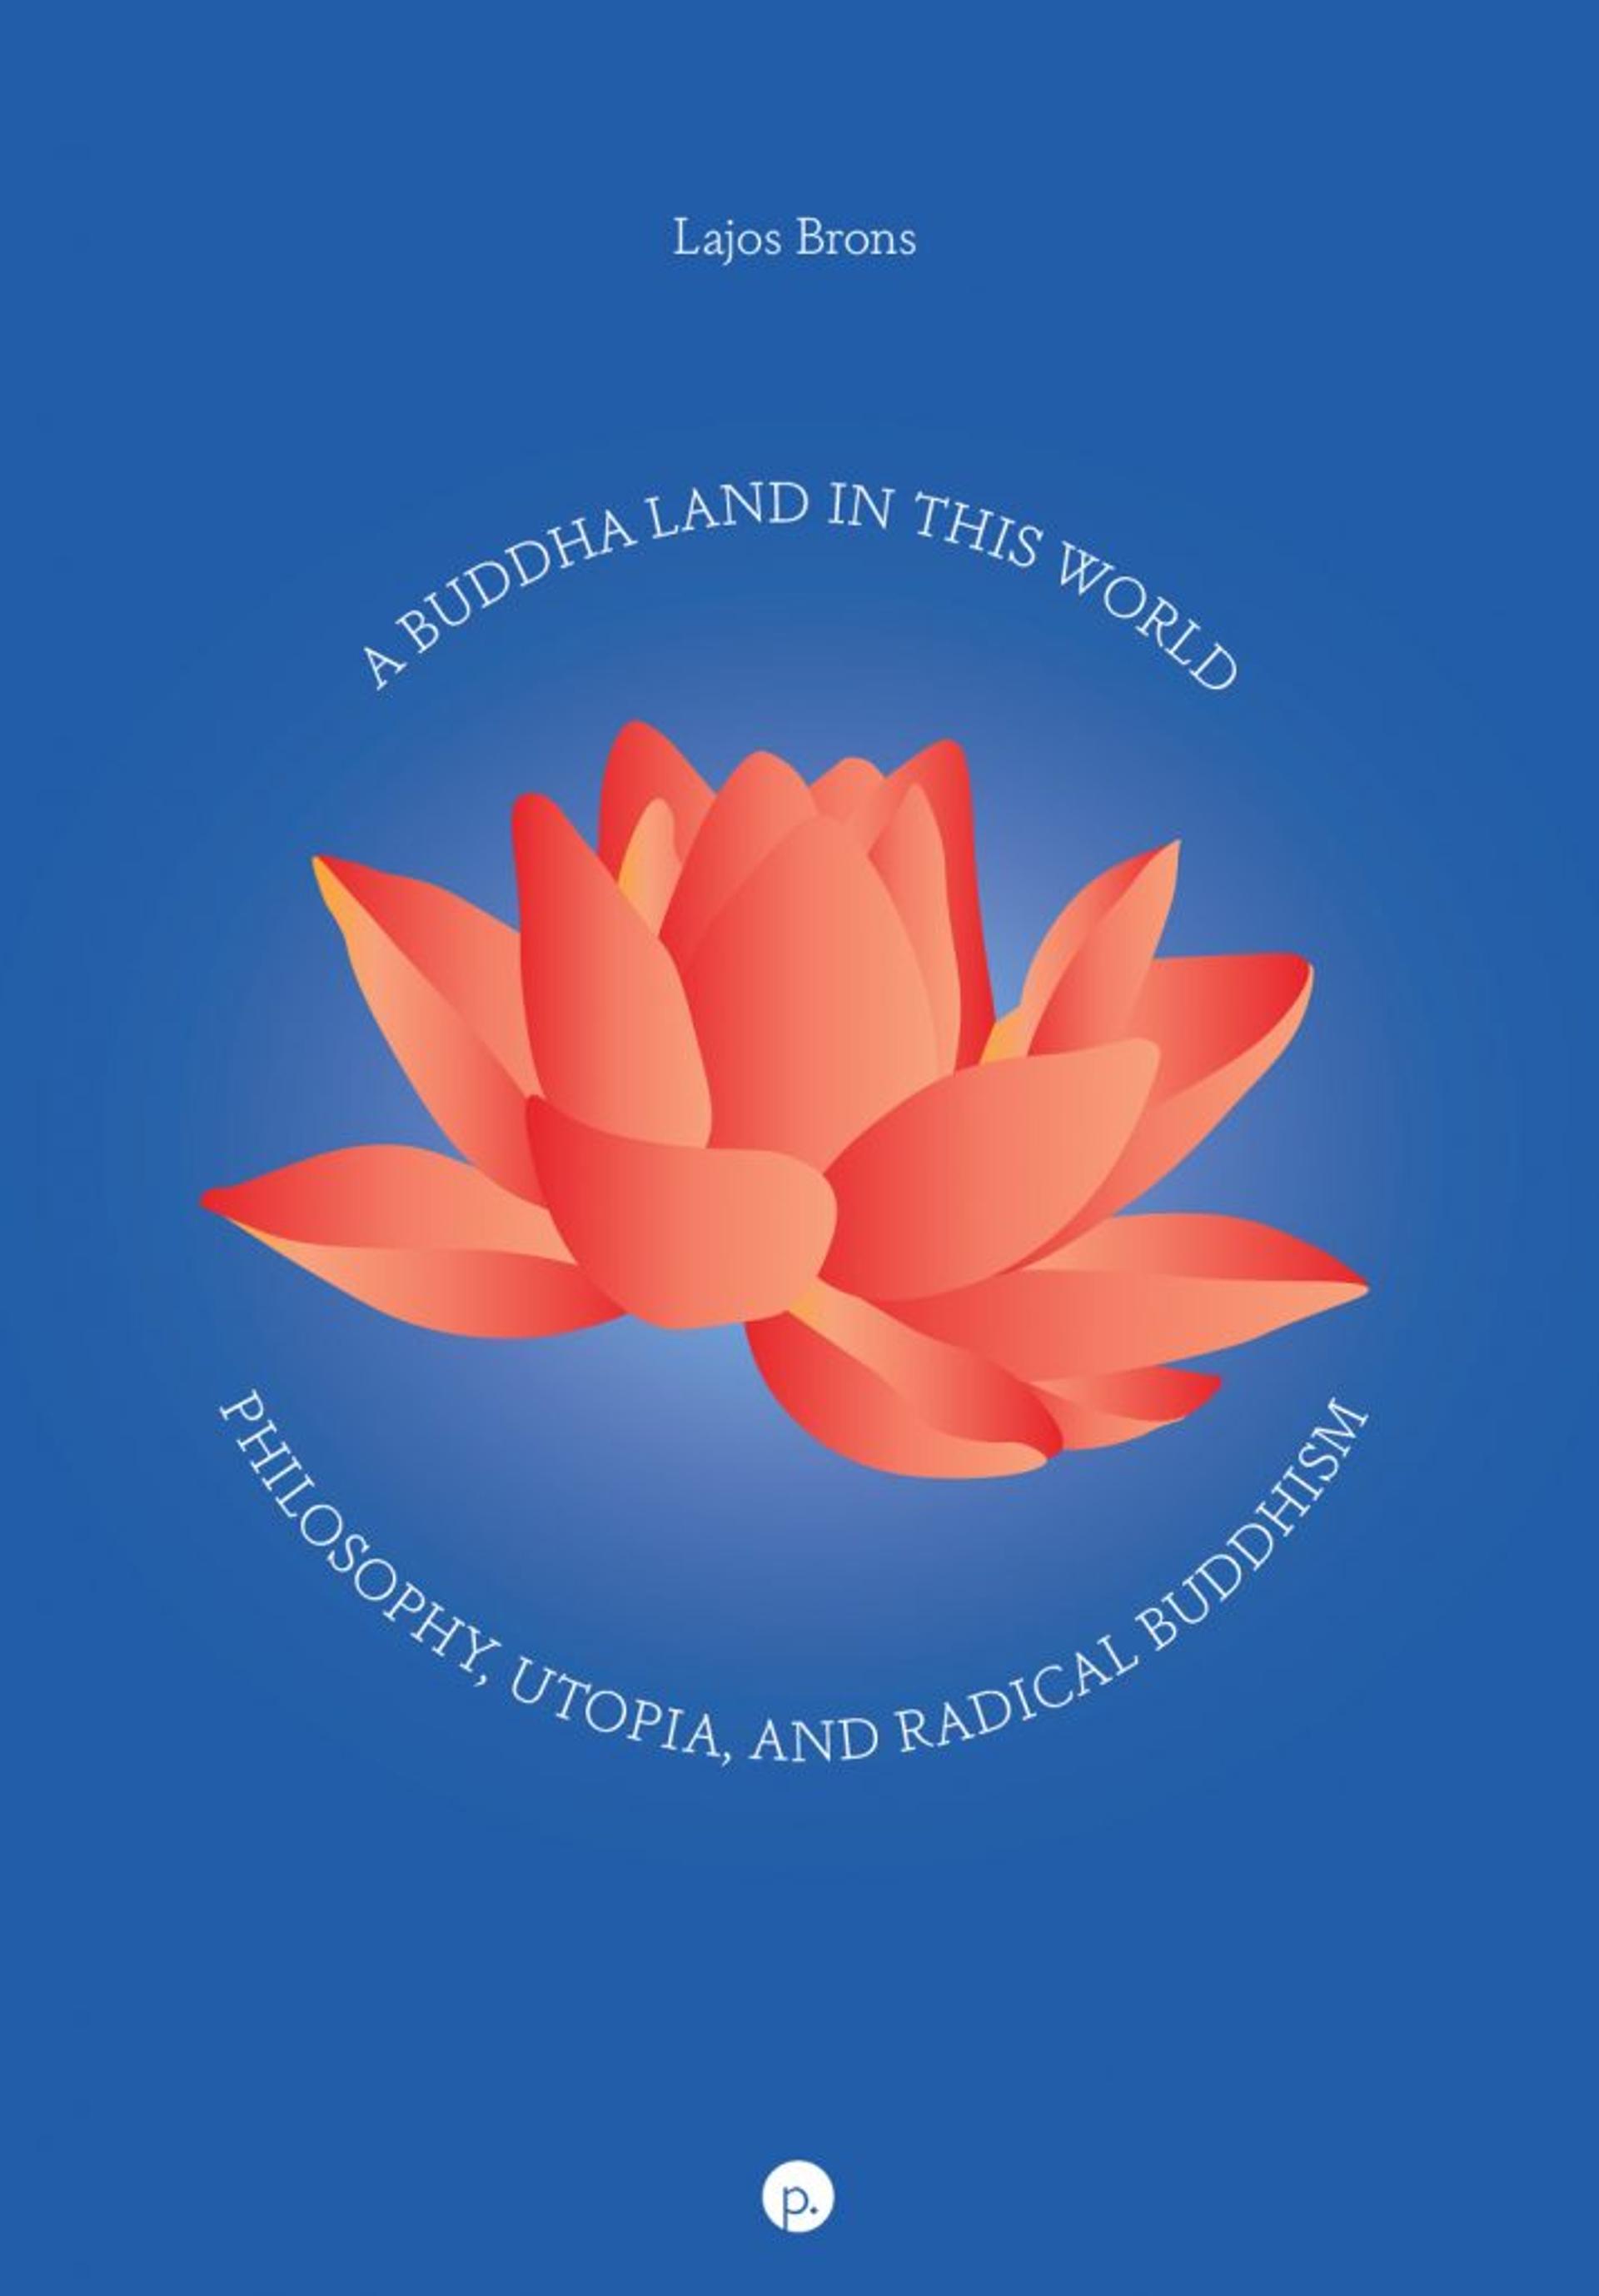 Cover of book titled A Buddha Land in This World: Philosophy, Utopia, and Radical Buddhism